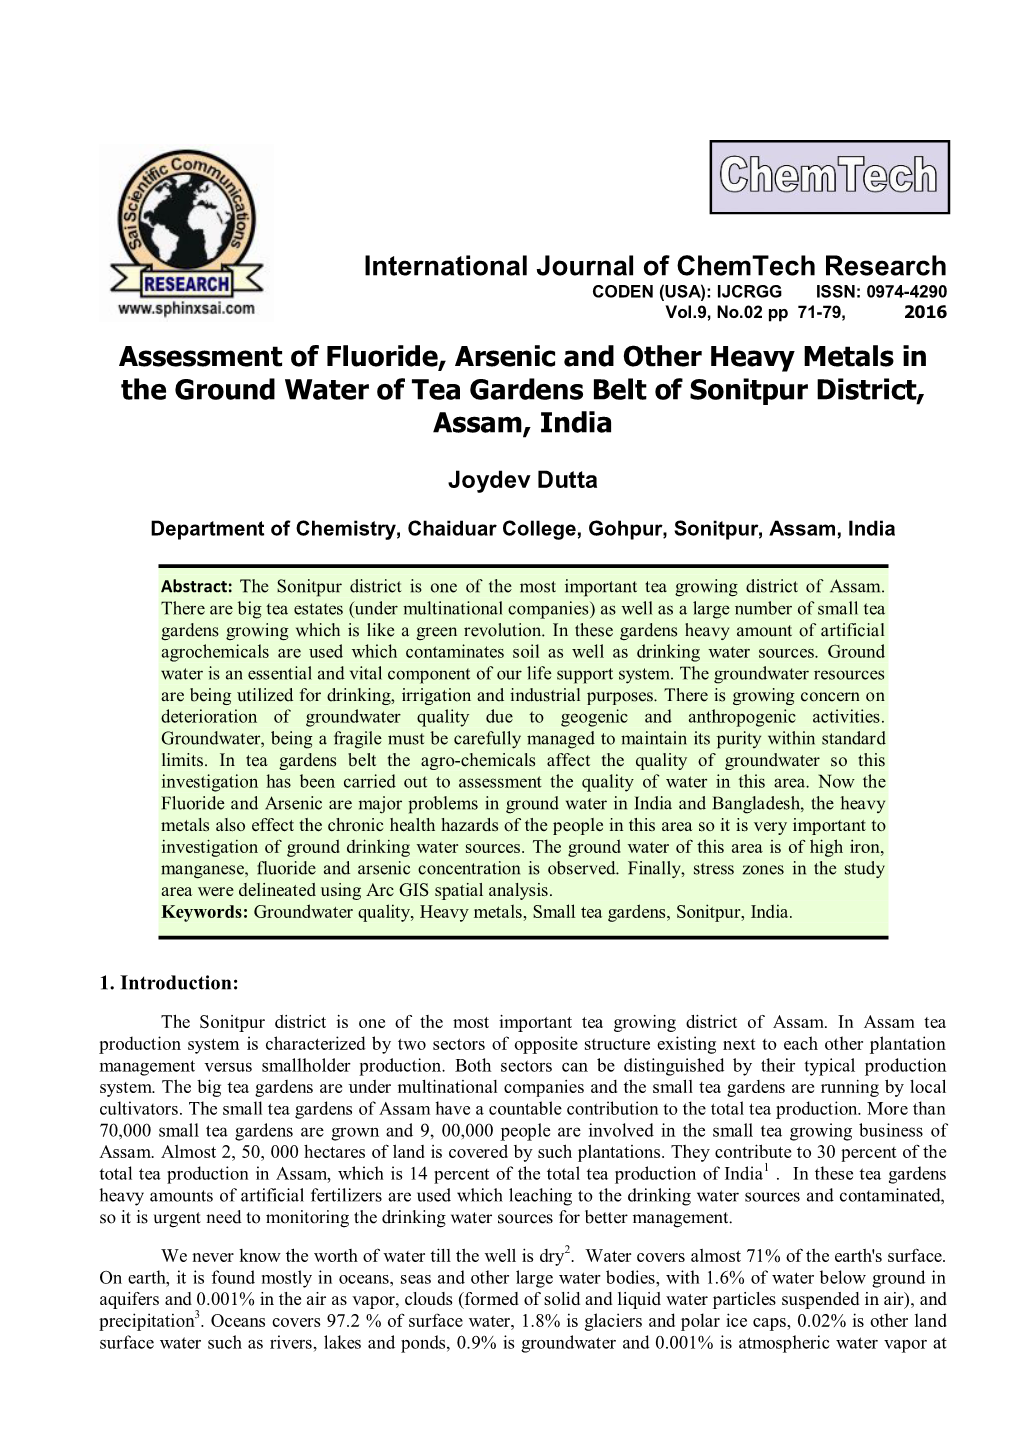 Assessment of Fluoride, Arsenic and Other Heavy Metals in the Ground Water of Tea Gardens Belt of Sonitpur District, Assam, India